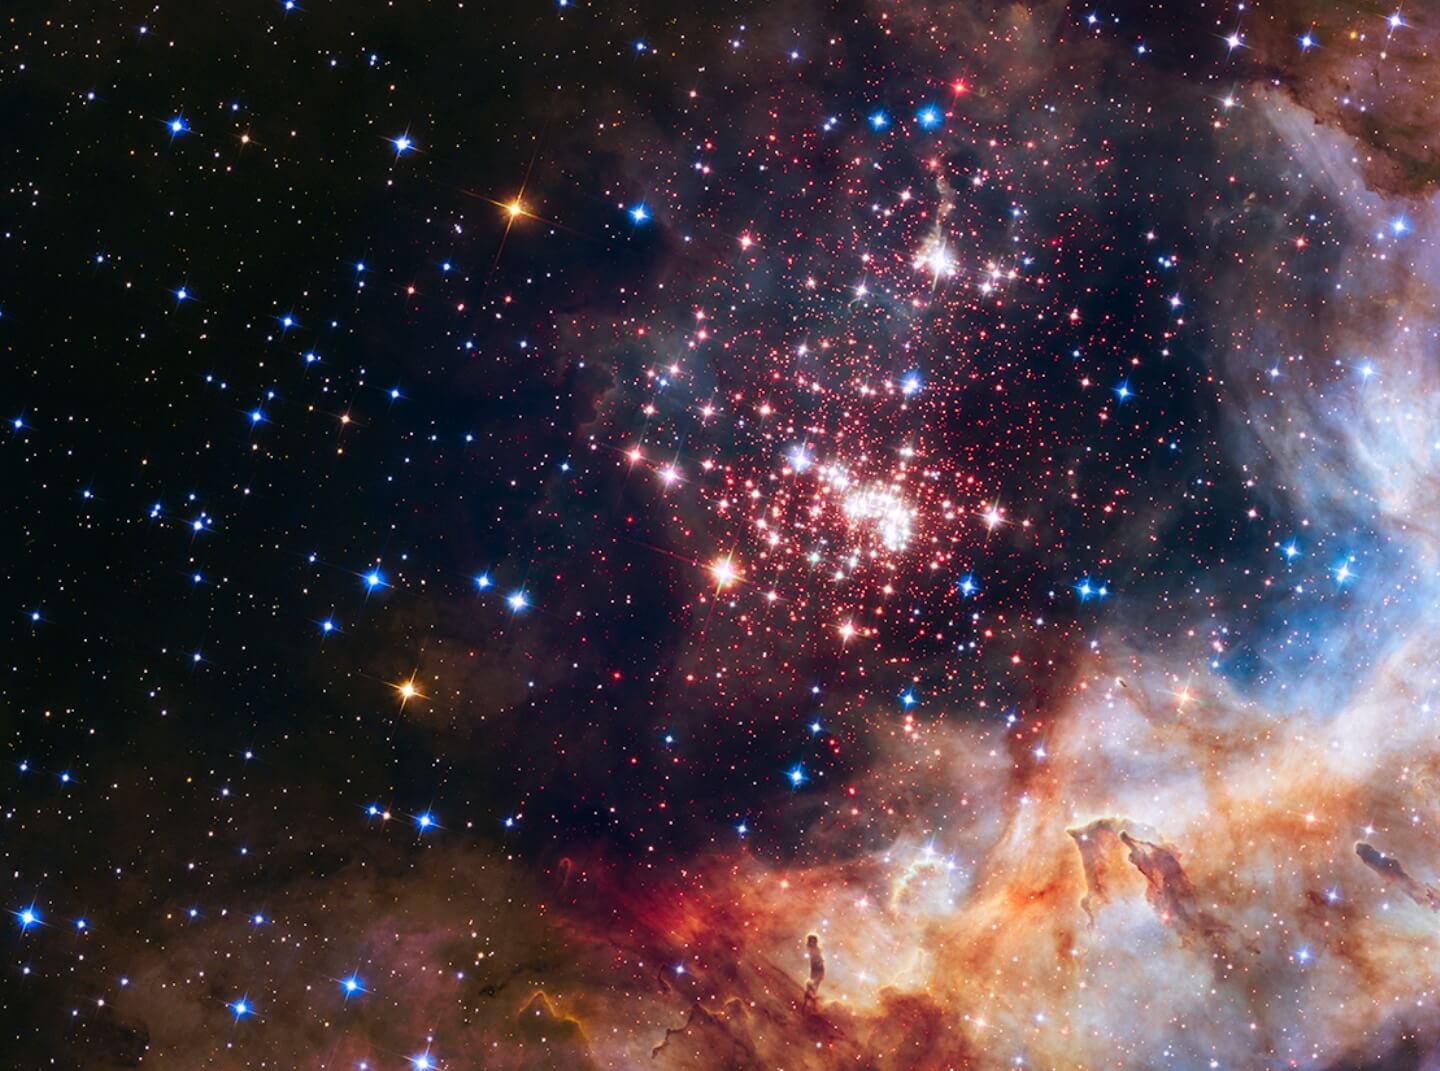 Deep space photograph displays a distant star cluster and nebula